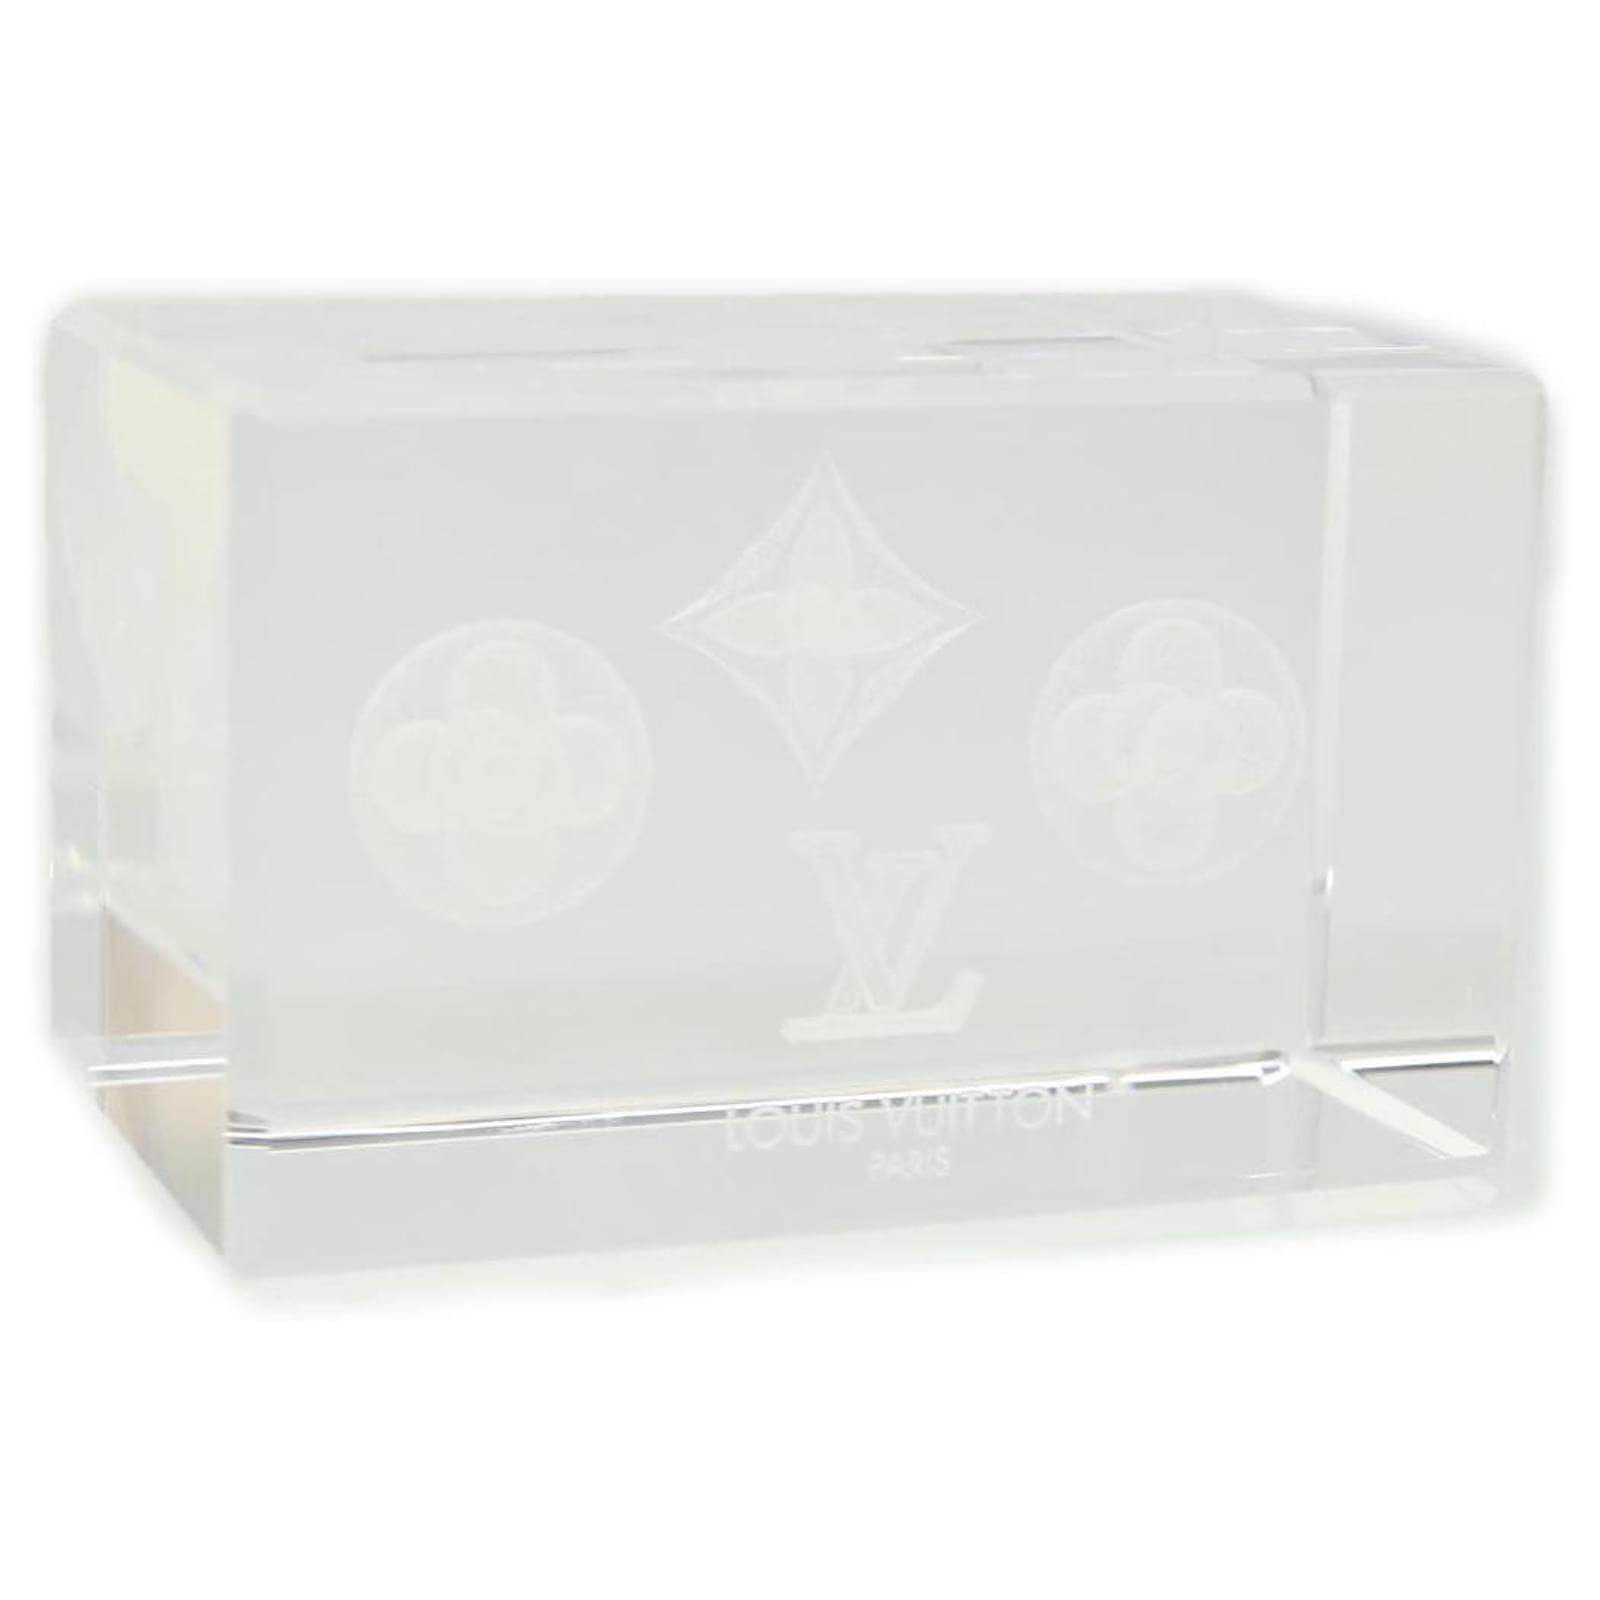 Louis Vuitton, Accessories, Louis Vuitton Crystal Trunk Paper Weight  Glass Vip Only Clear Lv Auth 35993